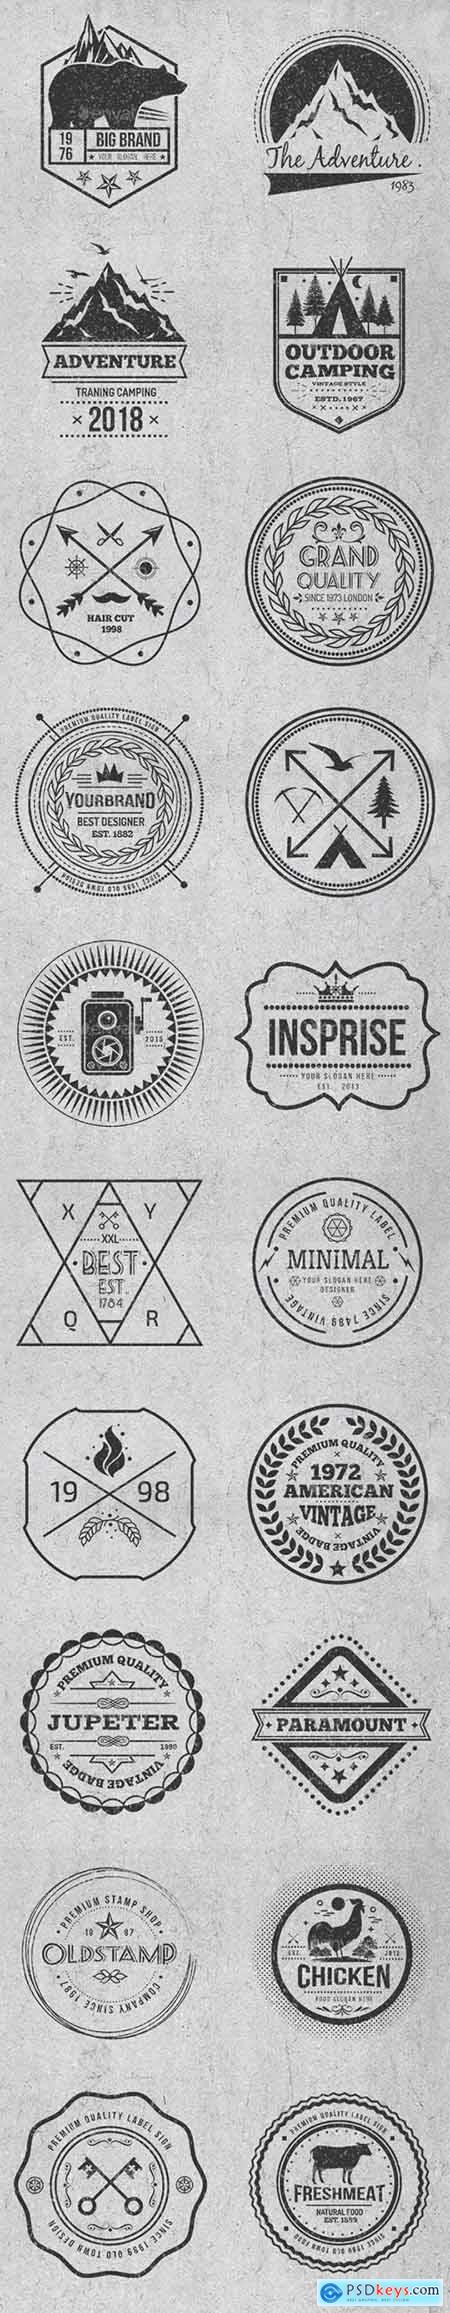 Vintage Style Badges and Logos Vol 4 17514983